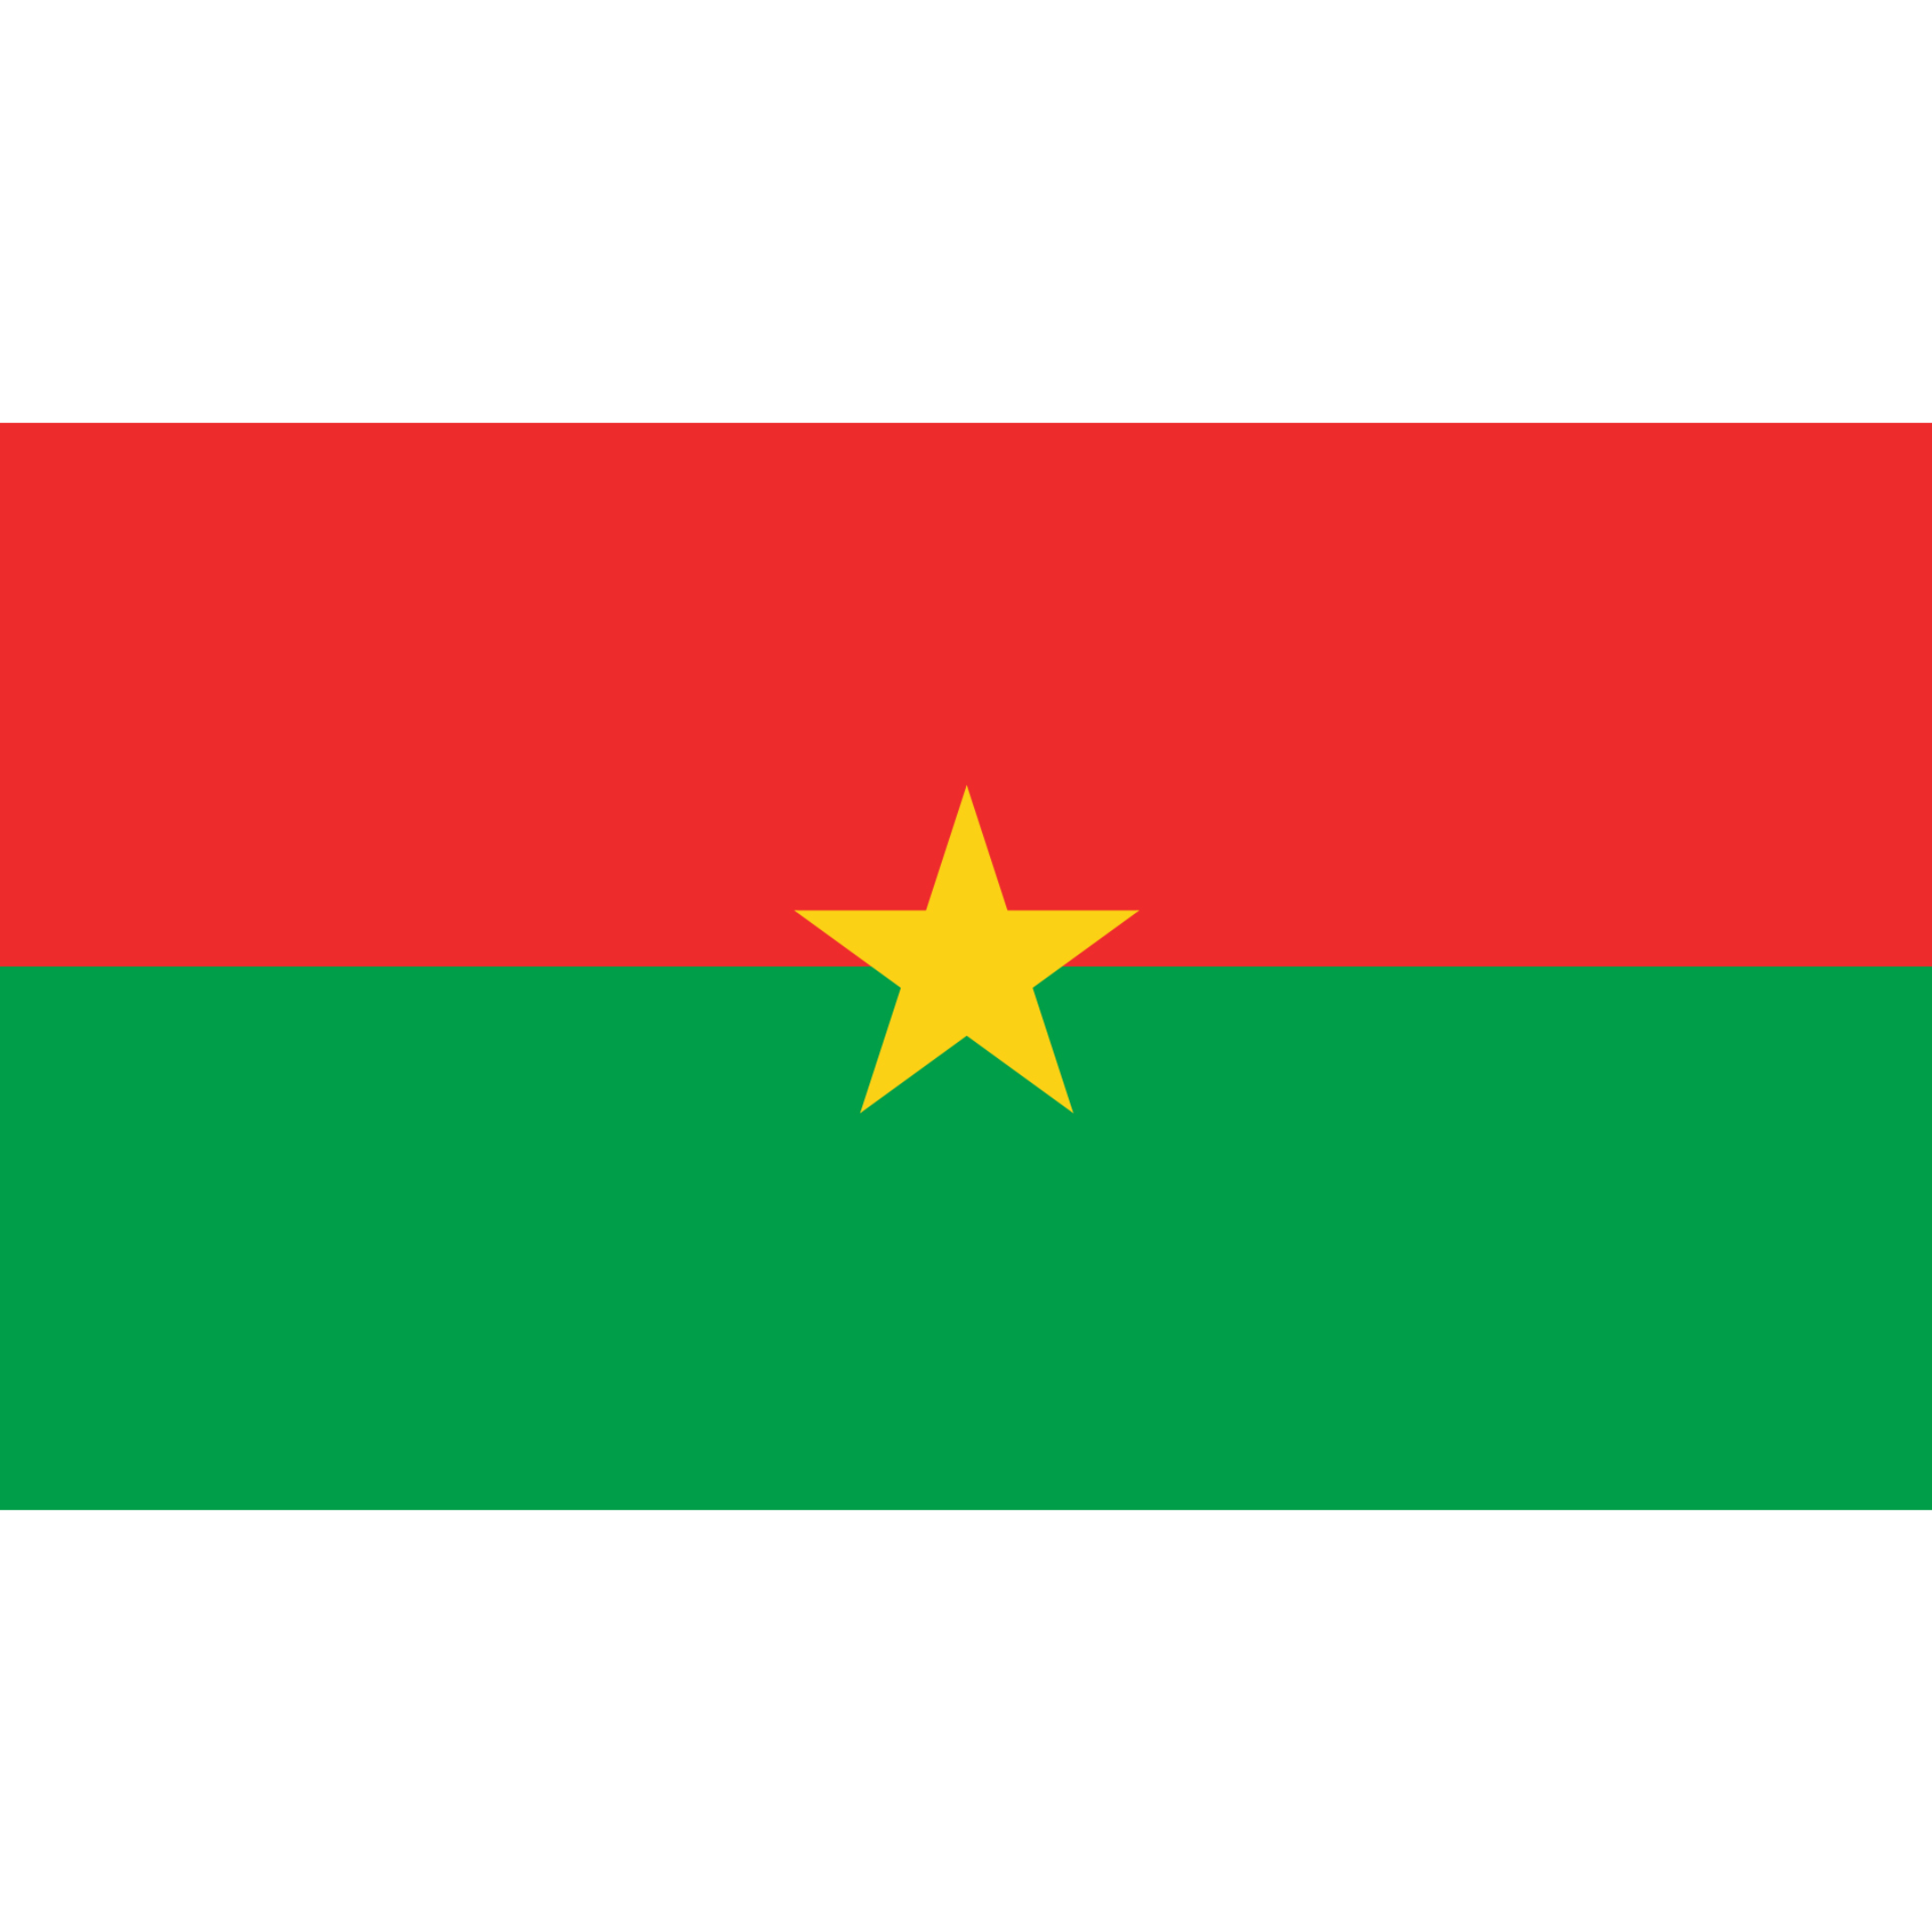 The Burkina Faso flag has 2 equal horizontal bands of red (above) and green, with a yellow five-pointed star in the middle.